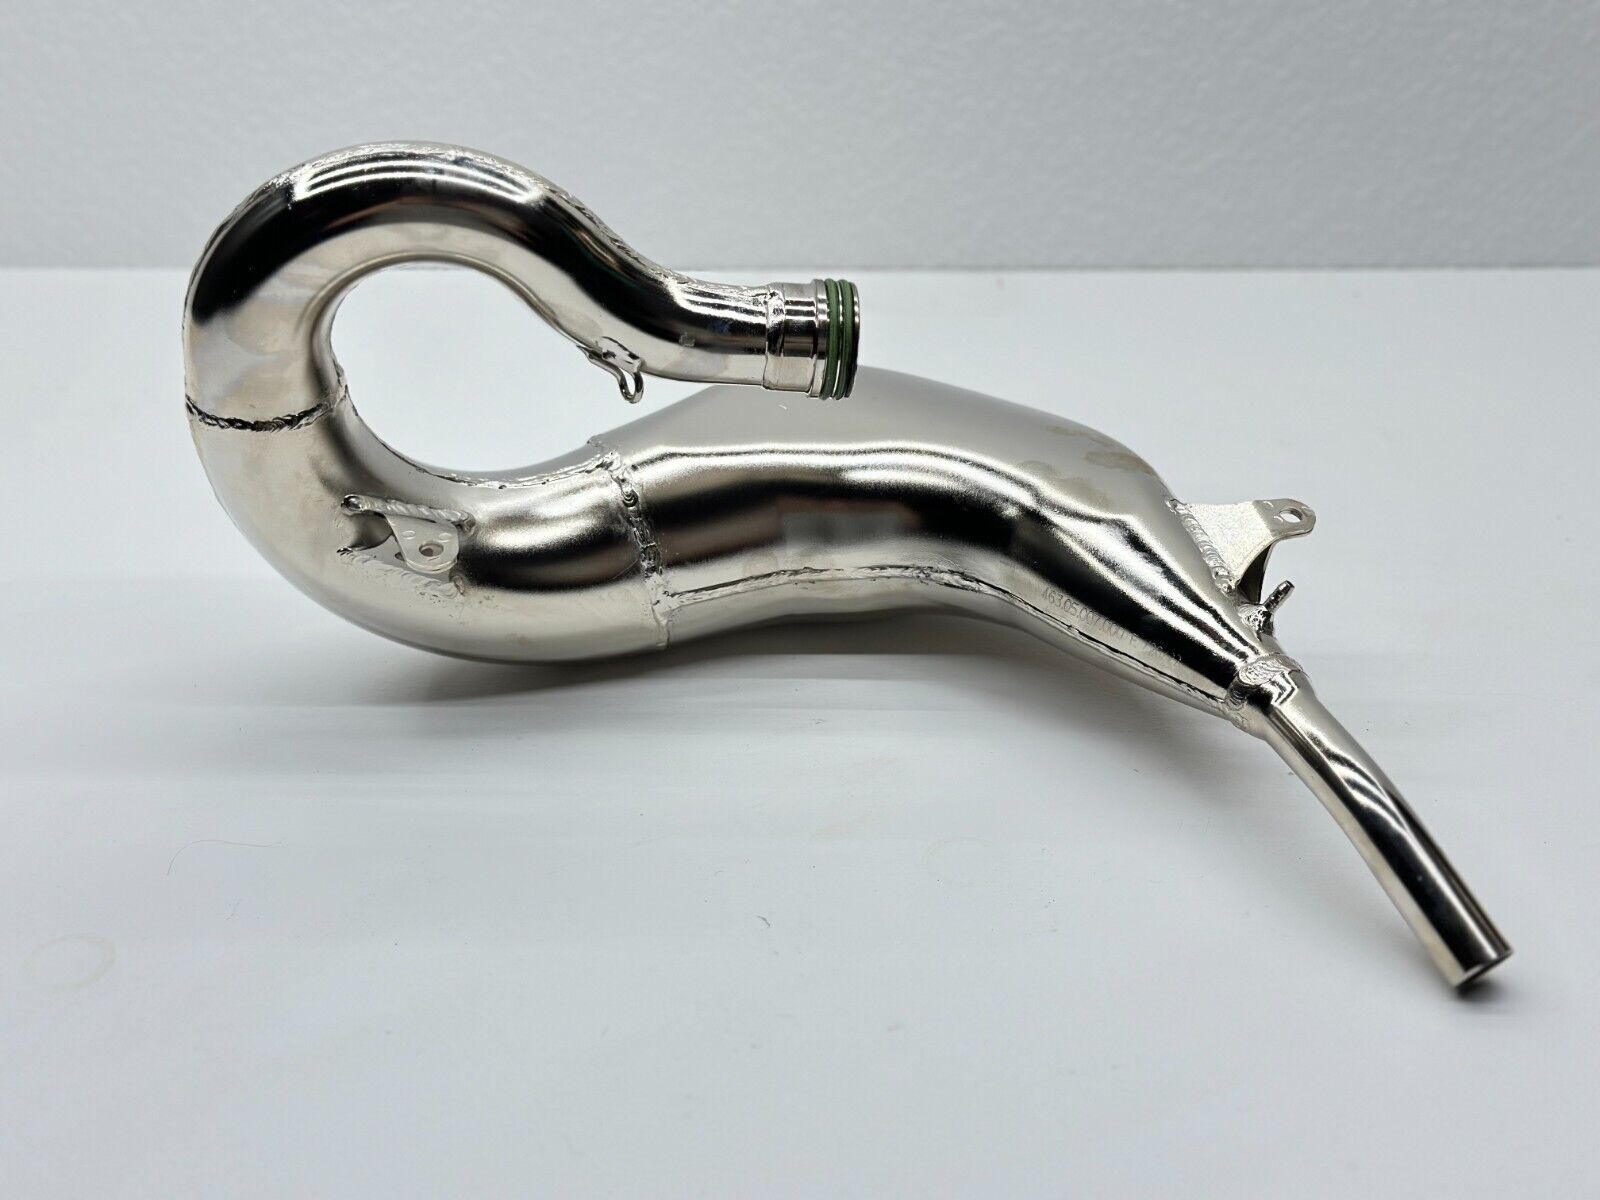 New 2023 KTM 65SX Exhaust Header Head Pipe Expansion Chamber Stock 46305007000